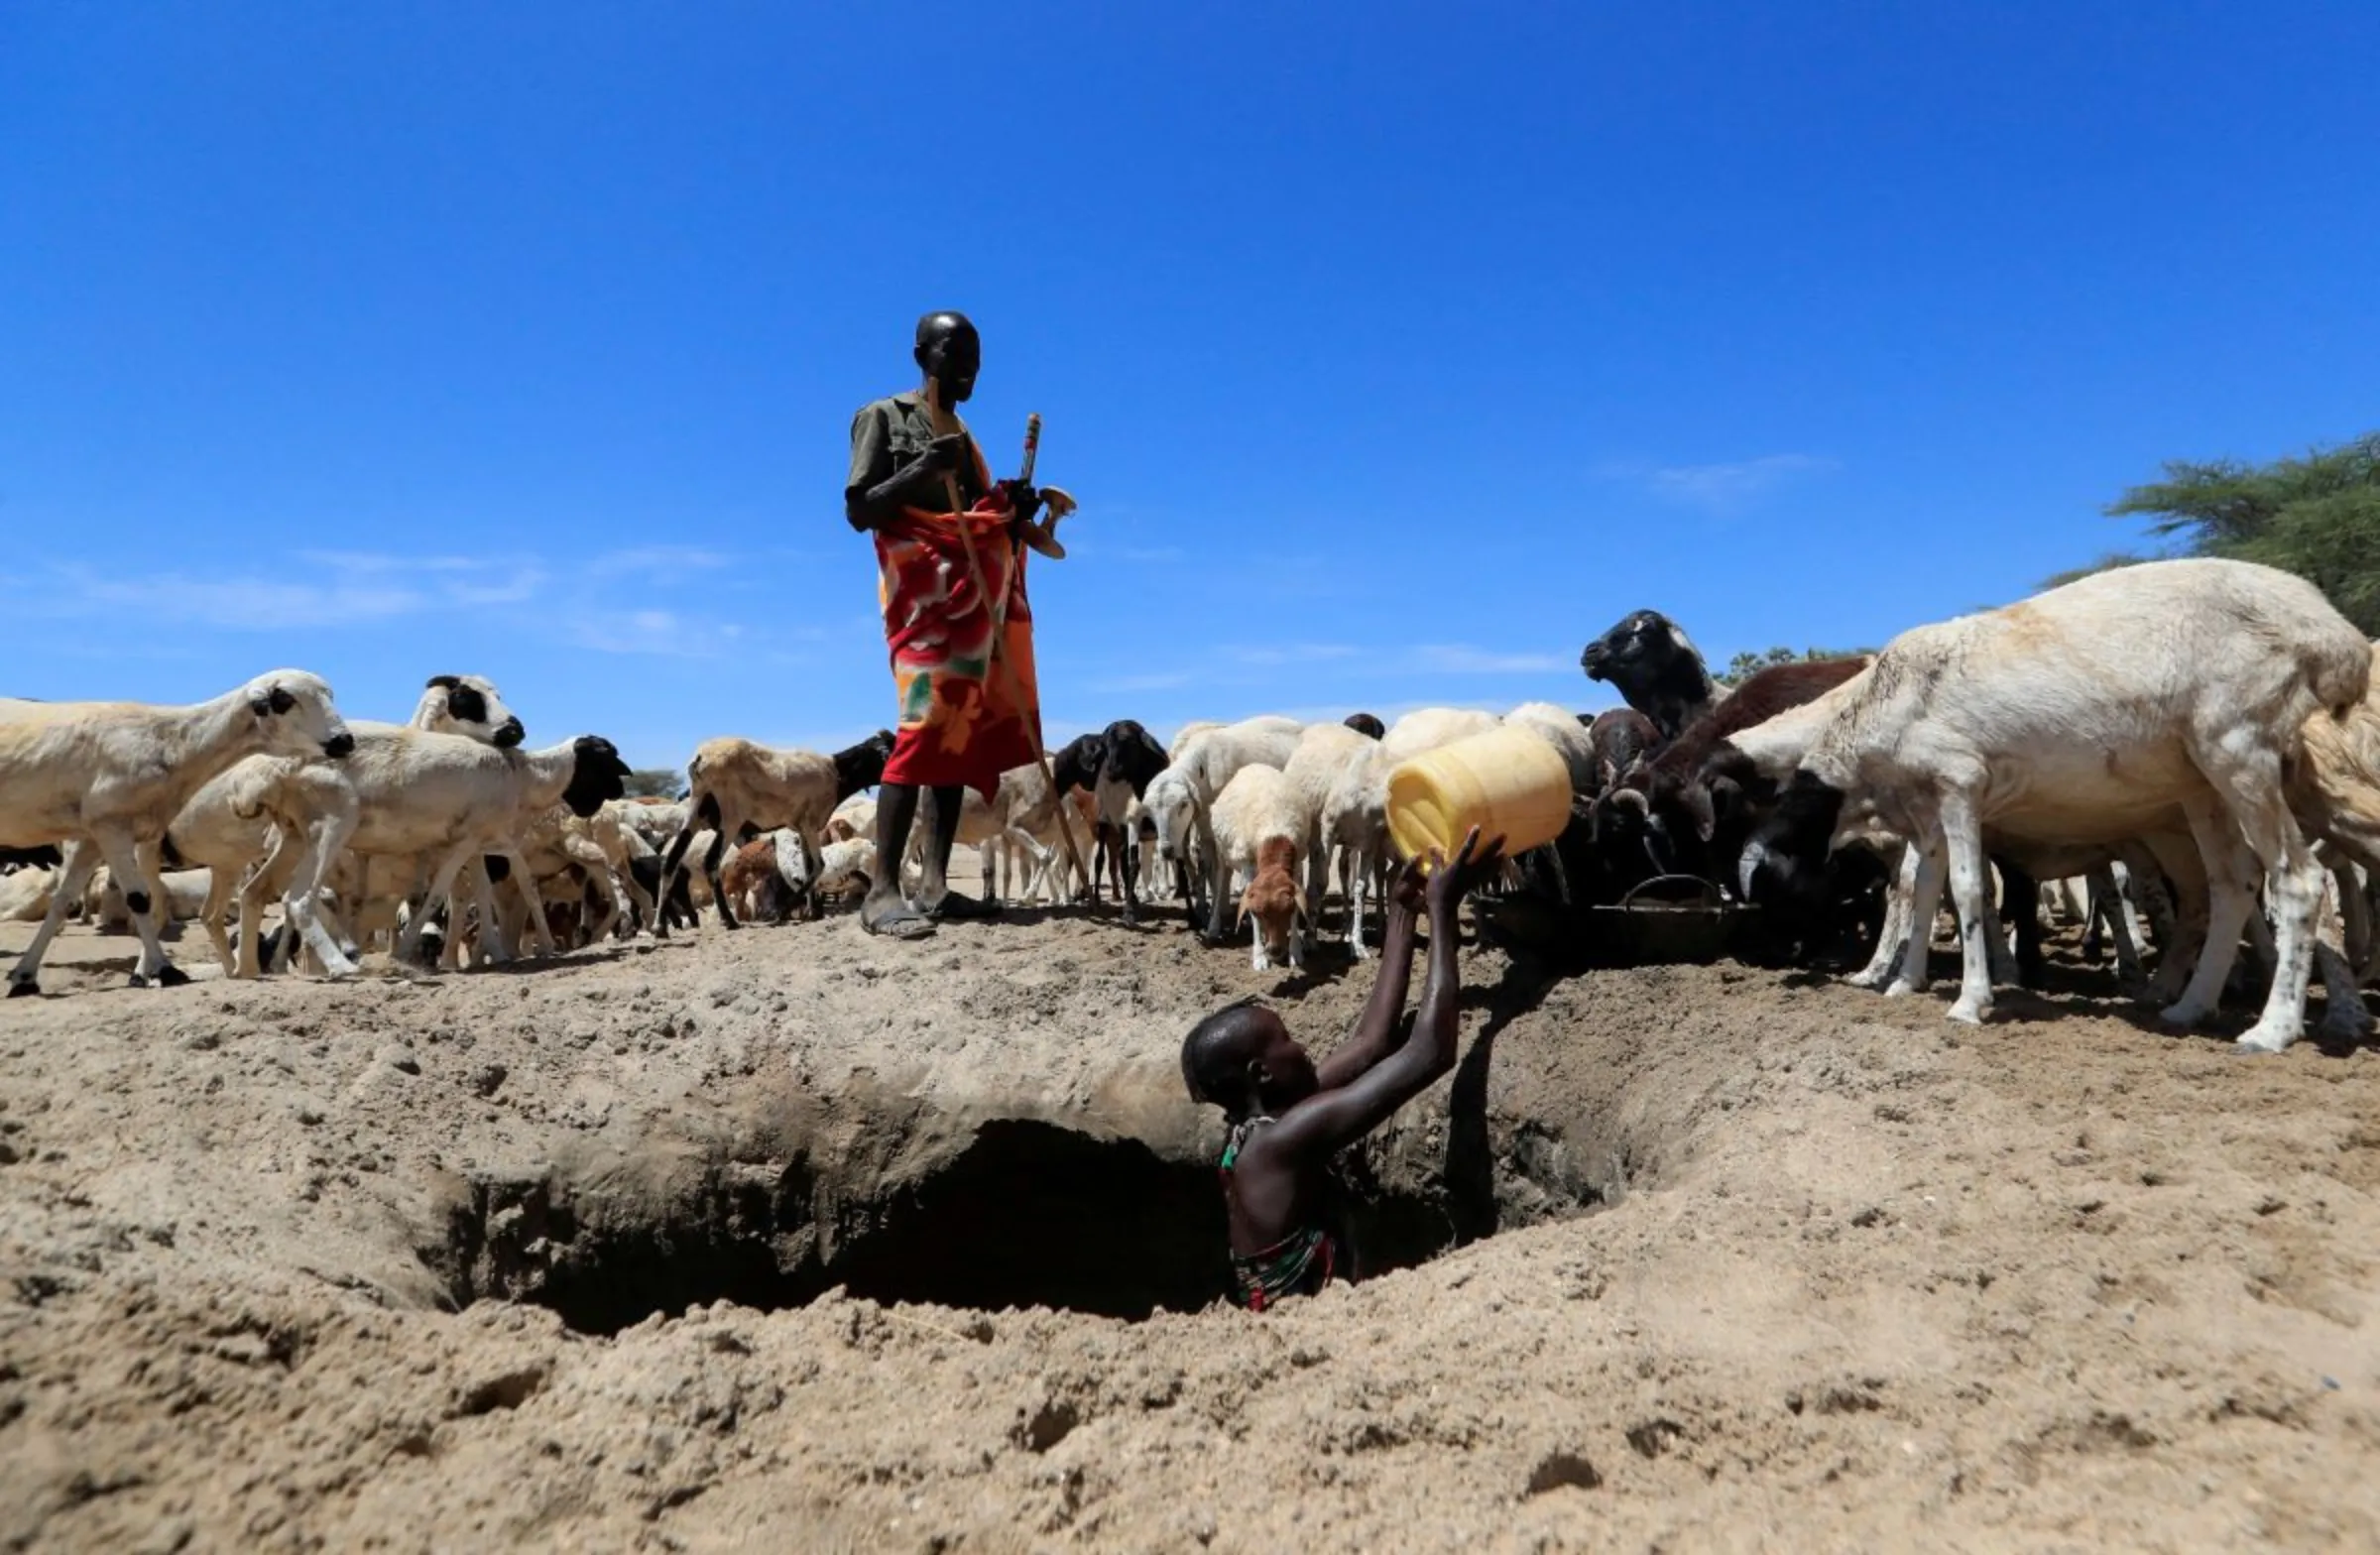 A pastoralist community affected by the worsening drought due to failed rain seasons, watches while his goats drink water collected from an open well dug on a dry riverbed in Loyoro village of Kalokol in Turkana, Kenya September 28, 2022. REUTERS/Thomas Mukoya